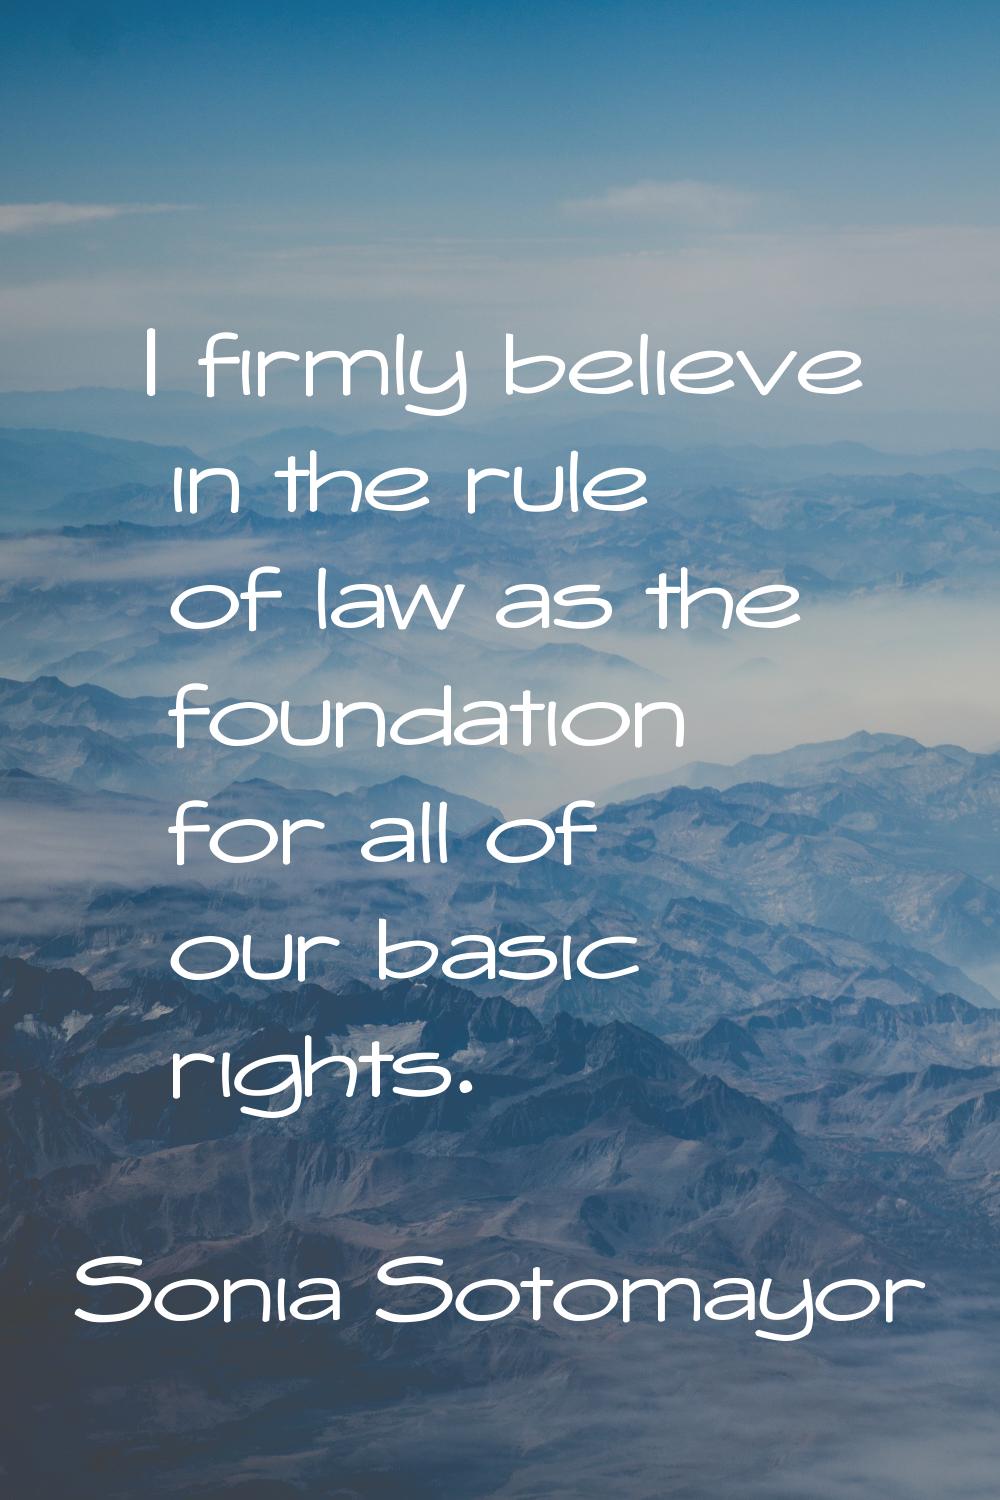 I firmly believe in the rule of law as the foundation for all of our basic rights.